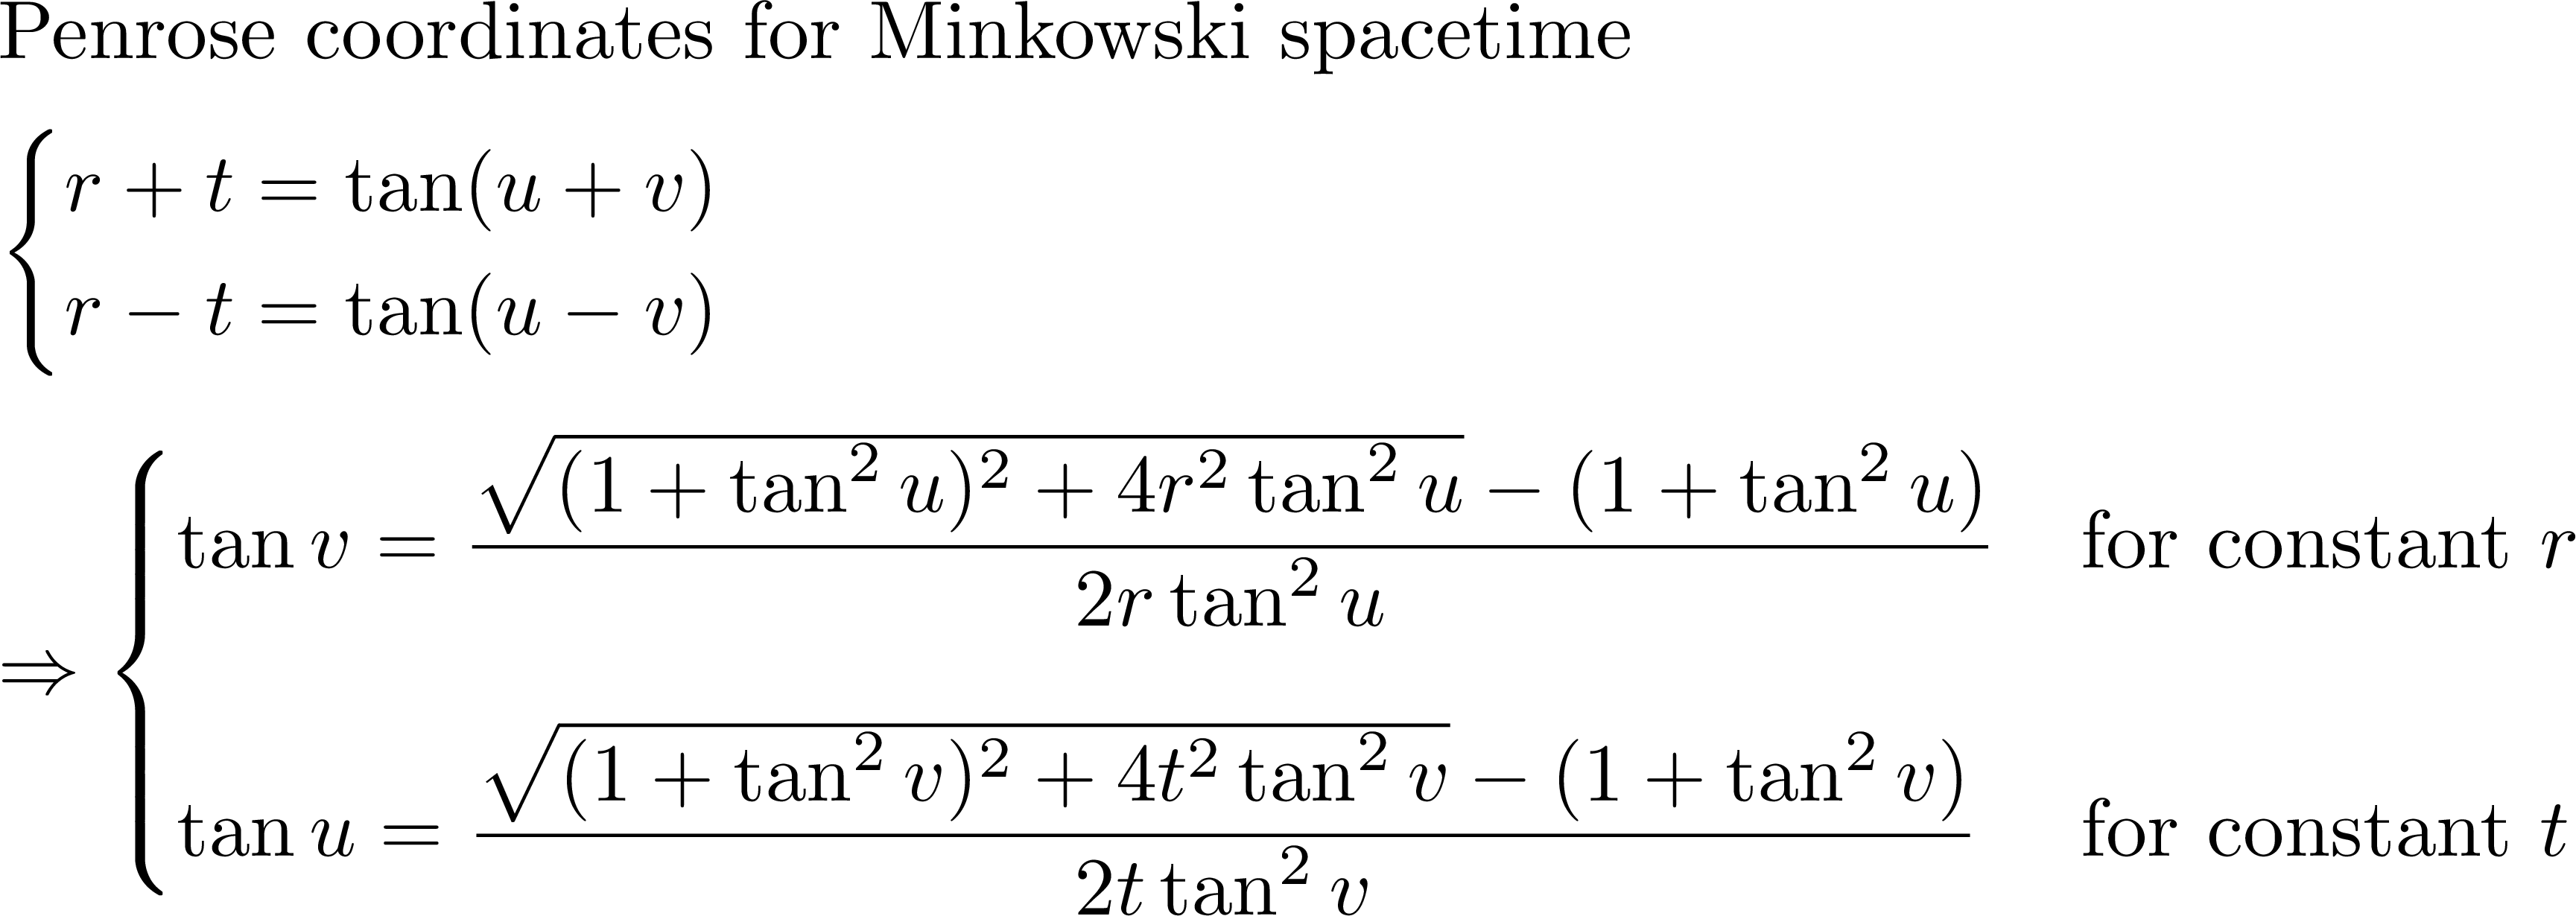 Penrose diagram for Minkowski spacetime with light cones.